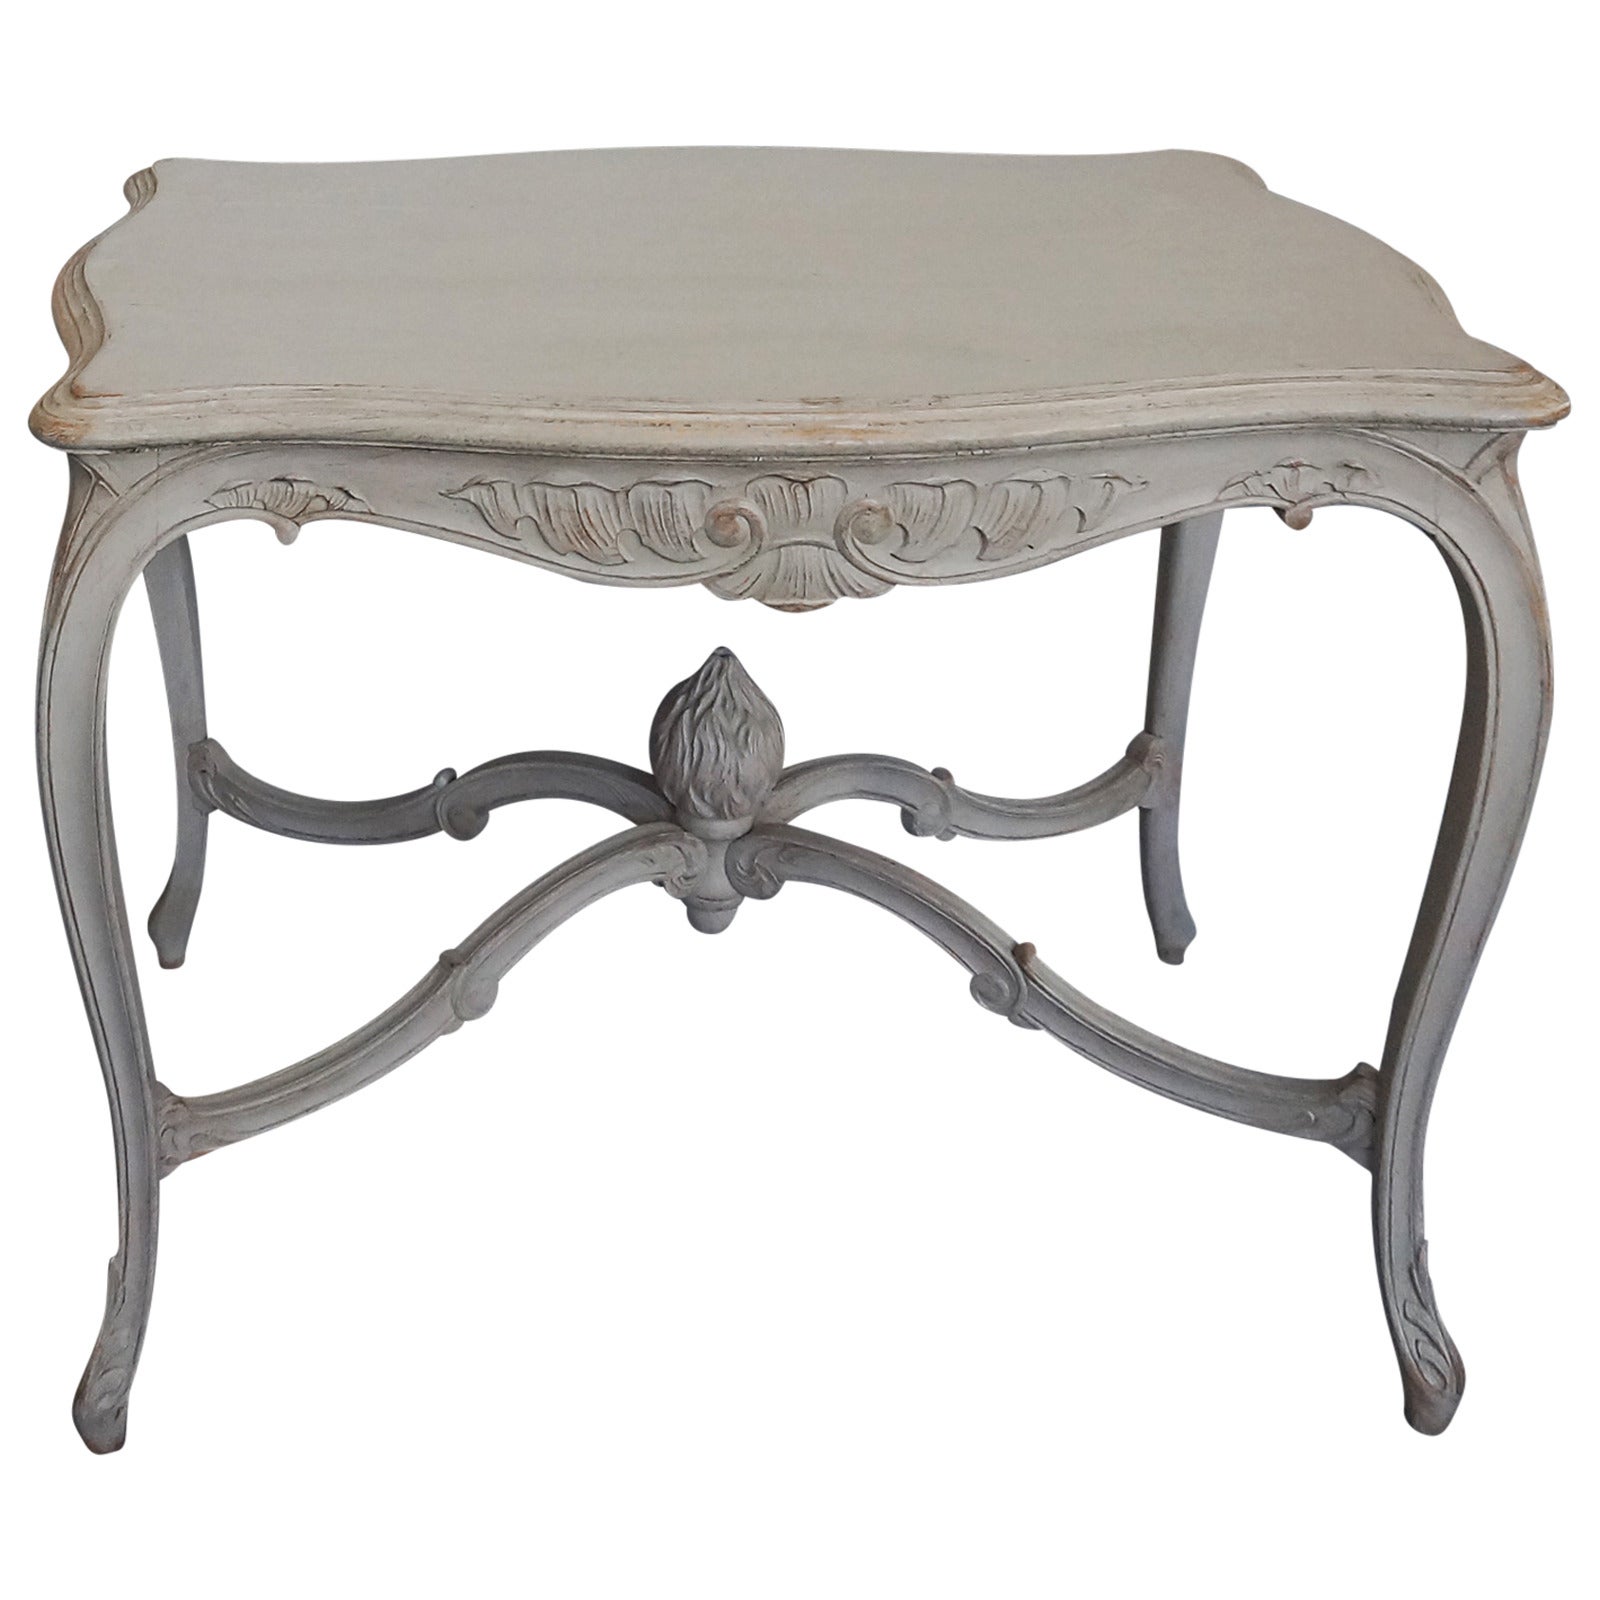 Center Table with Carved Finial